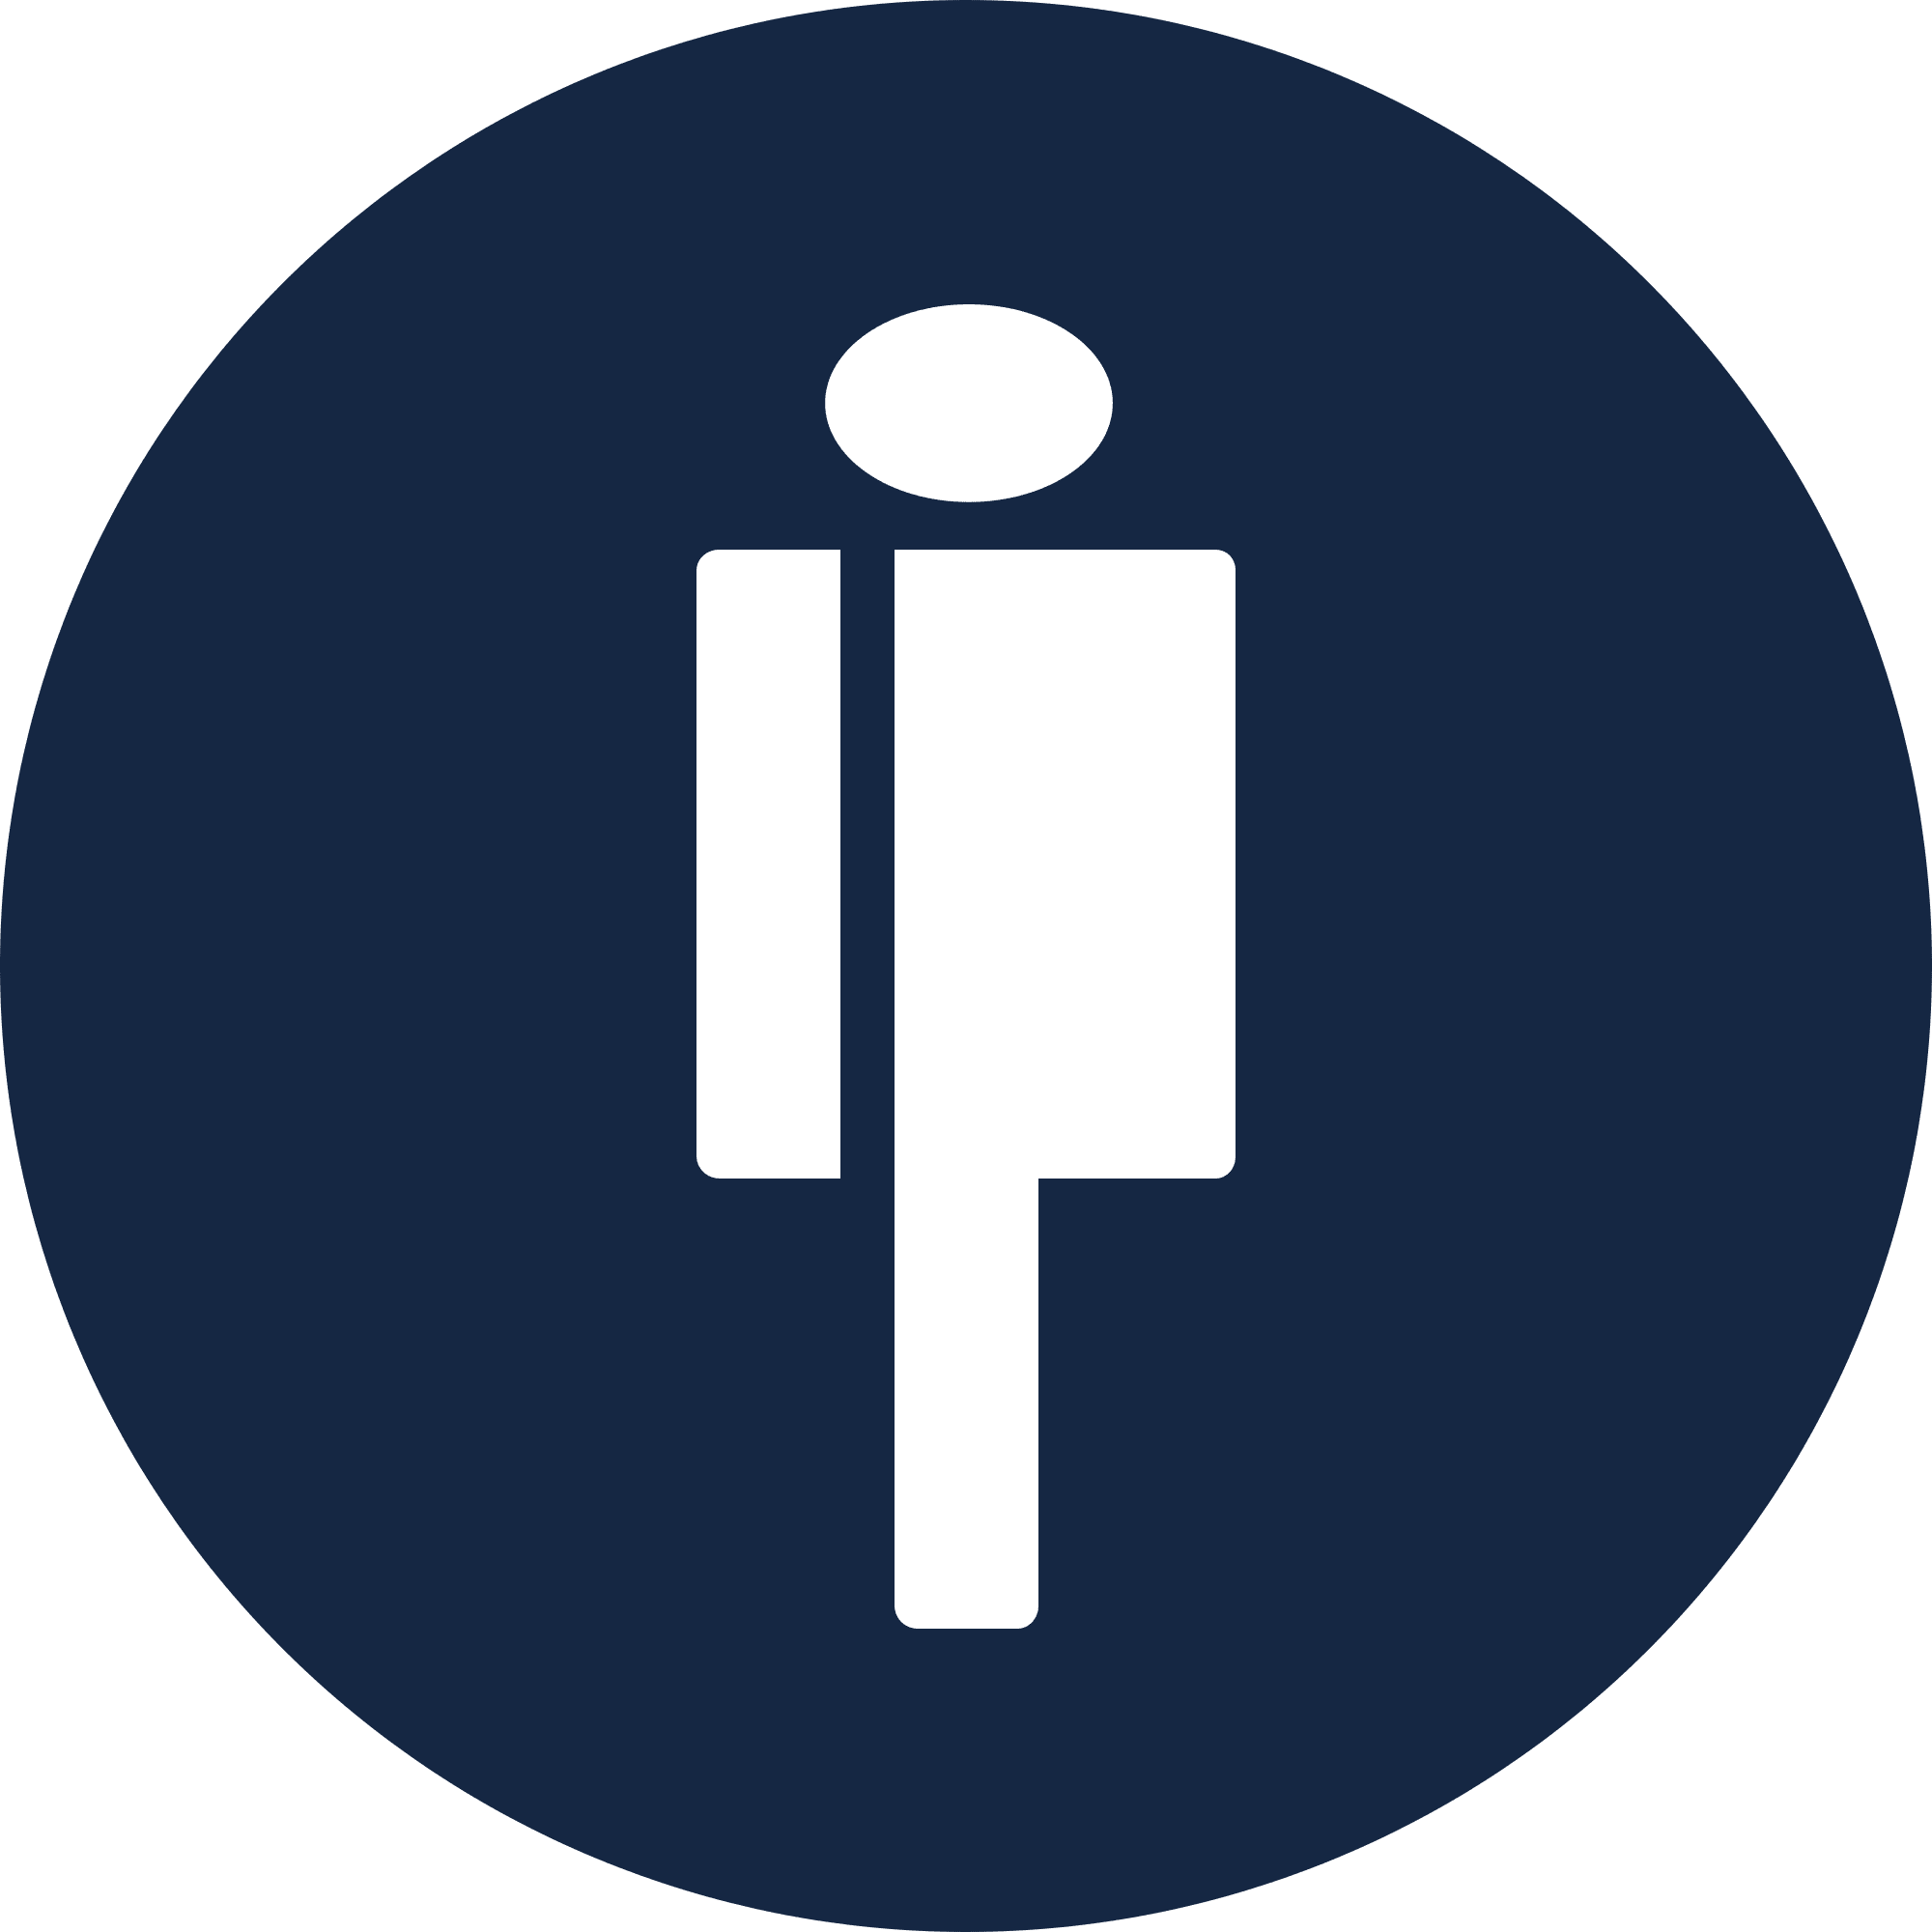 Populous logo in png format